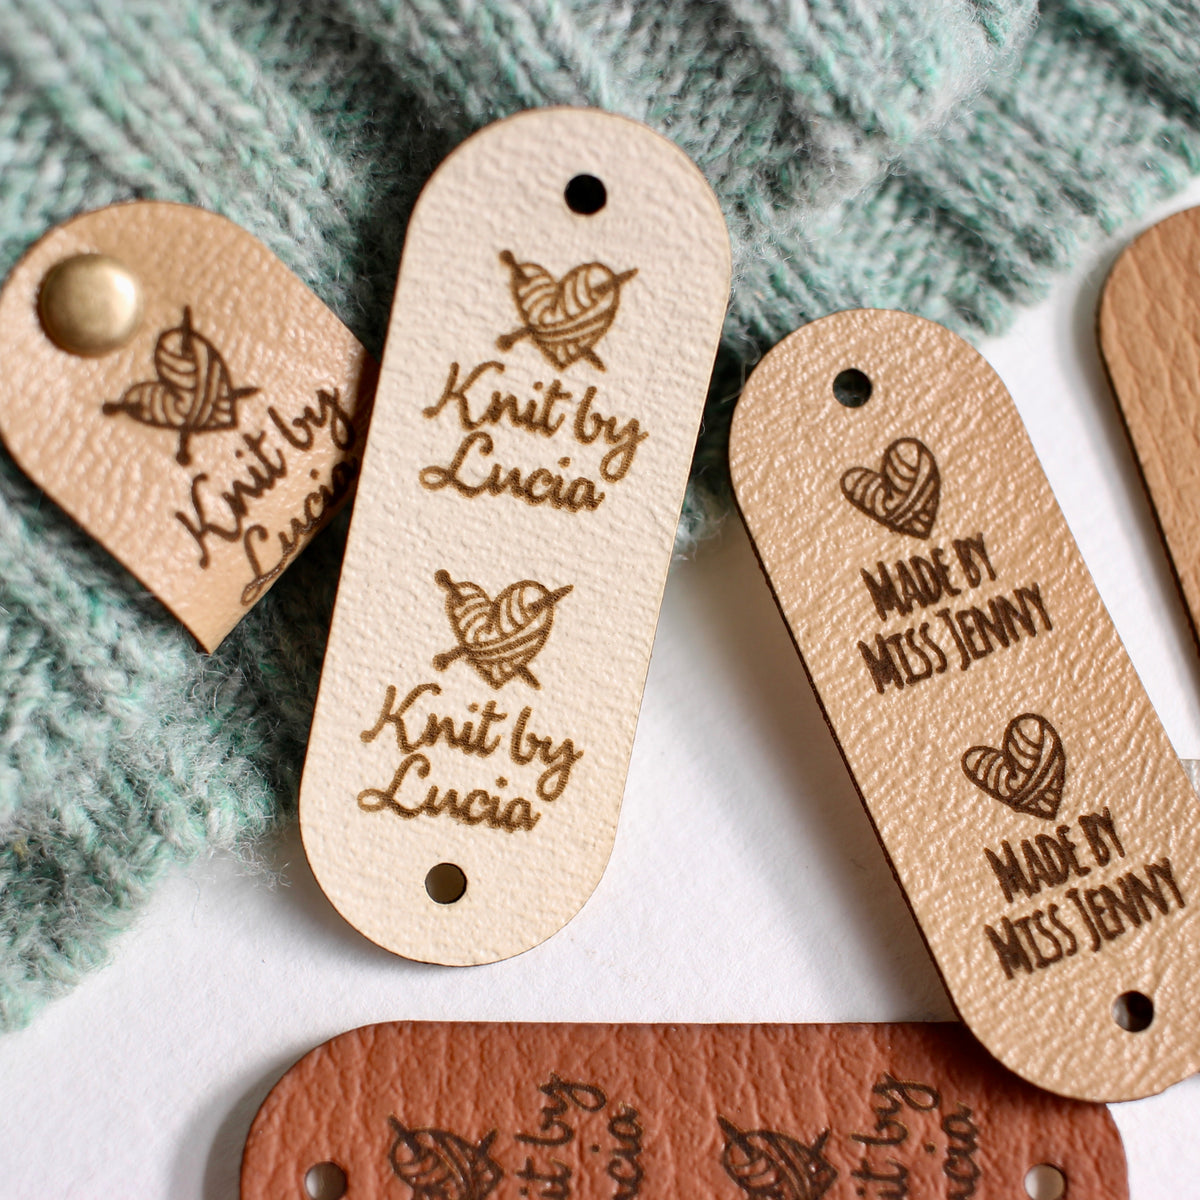  Customized 2 x 1 in Faux Leather Product Tags, SEW-ON  Personalized Tags for Knitting and Crochet, Rivets Cute Labels Handmade  Items (100 Labels) : Handmade Products